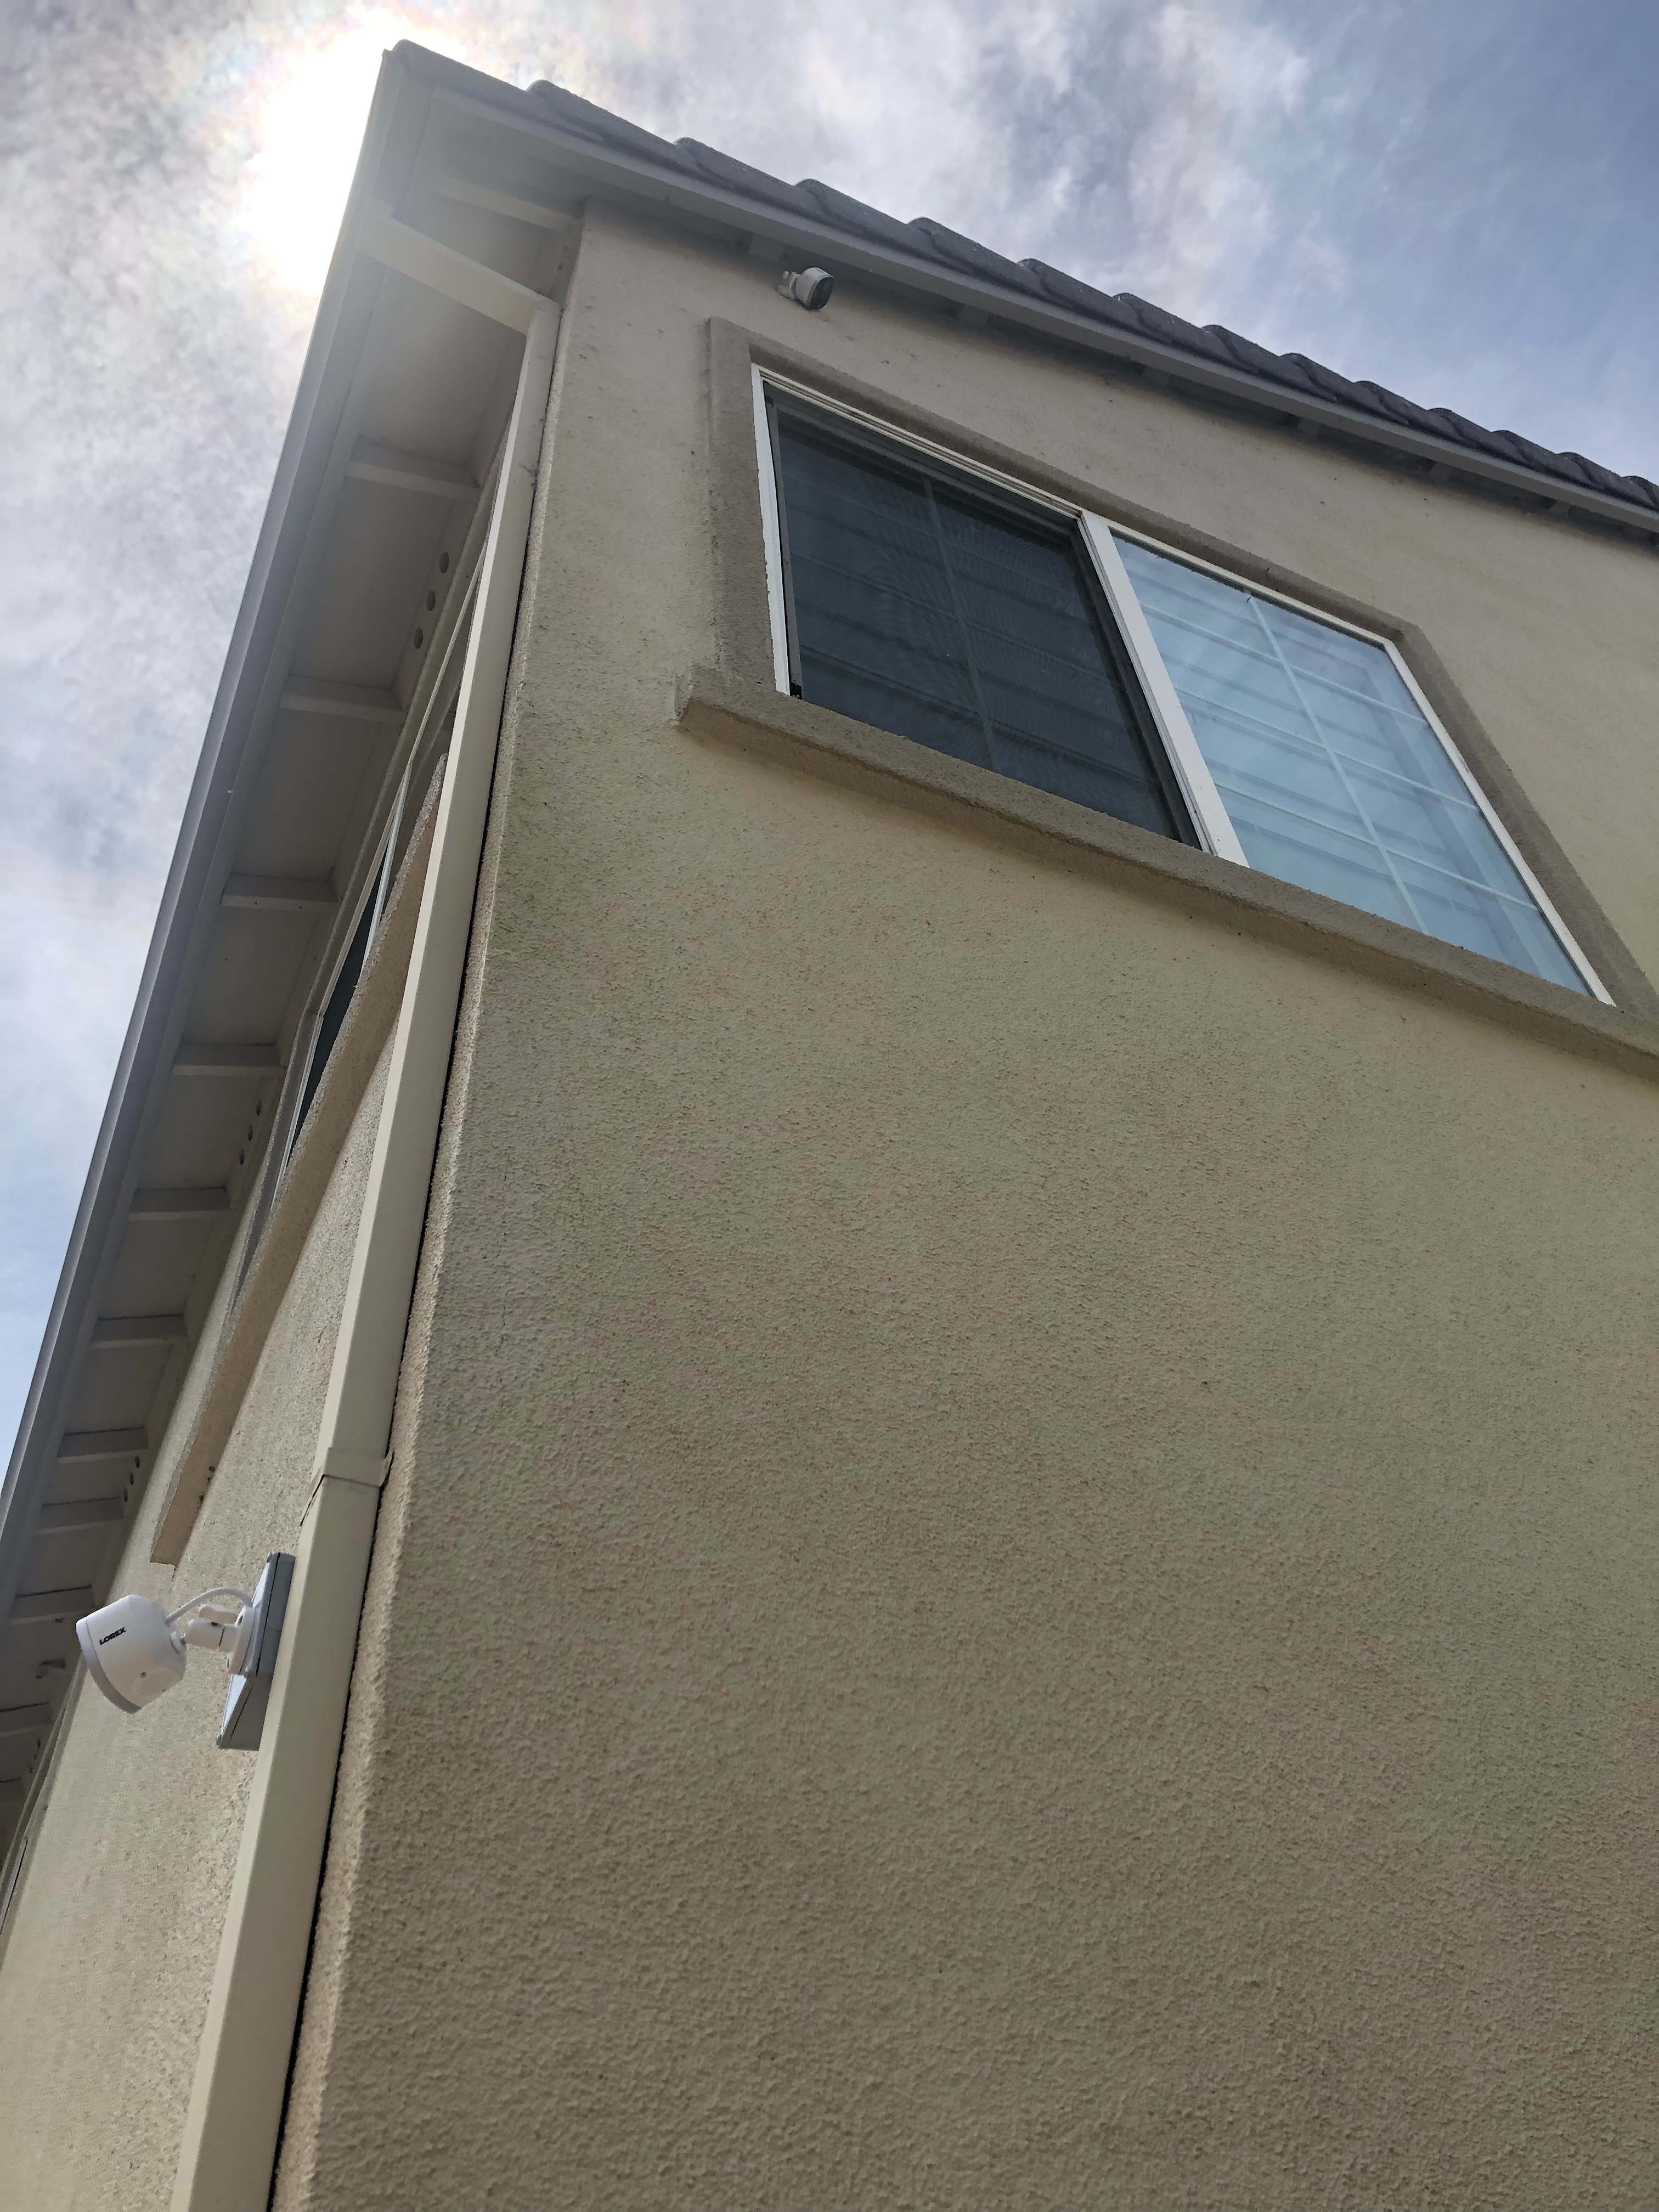 speco camera on two story home